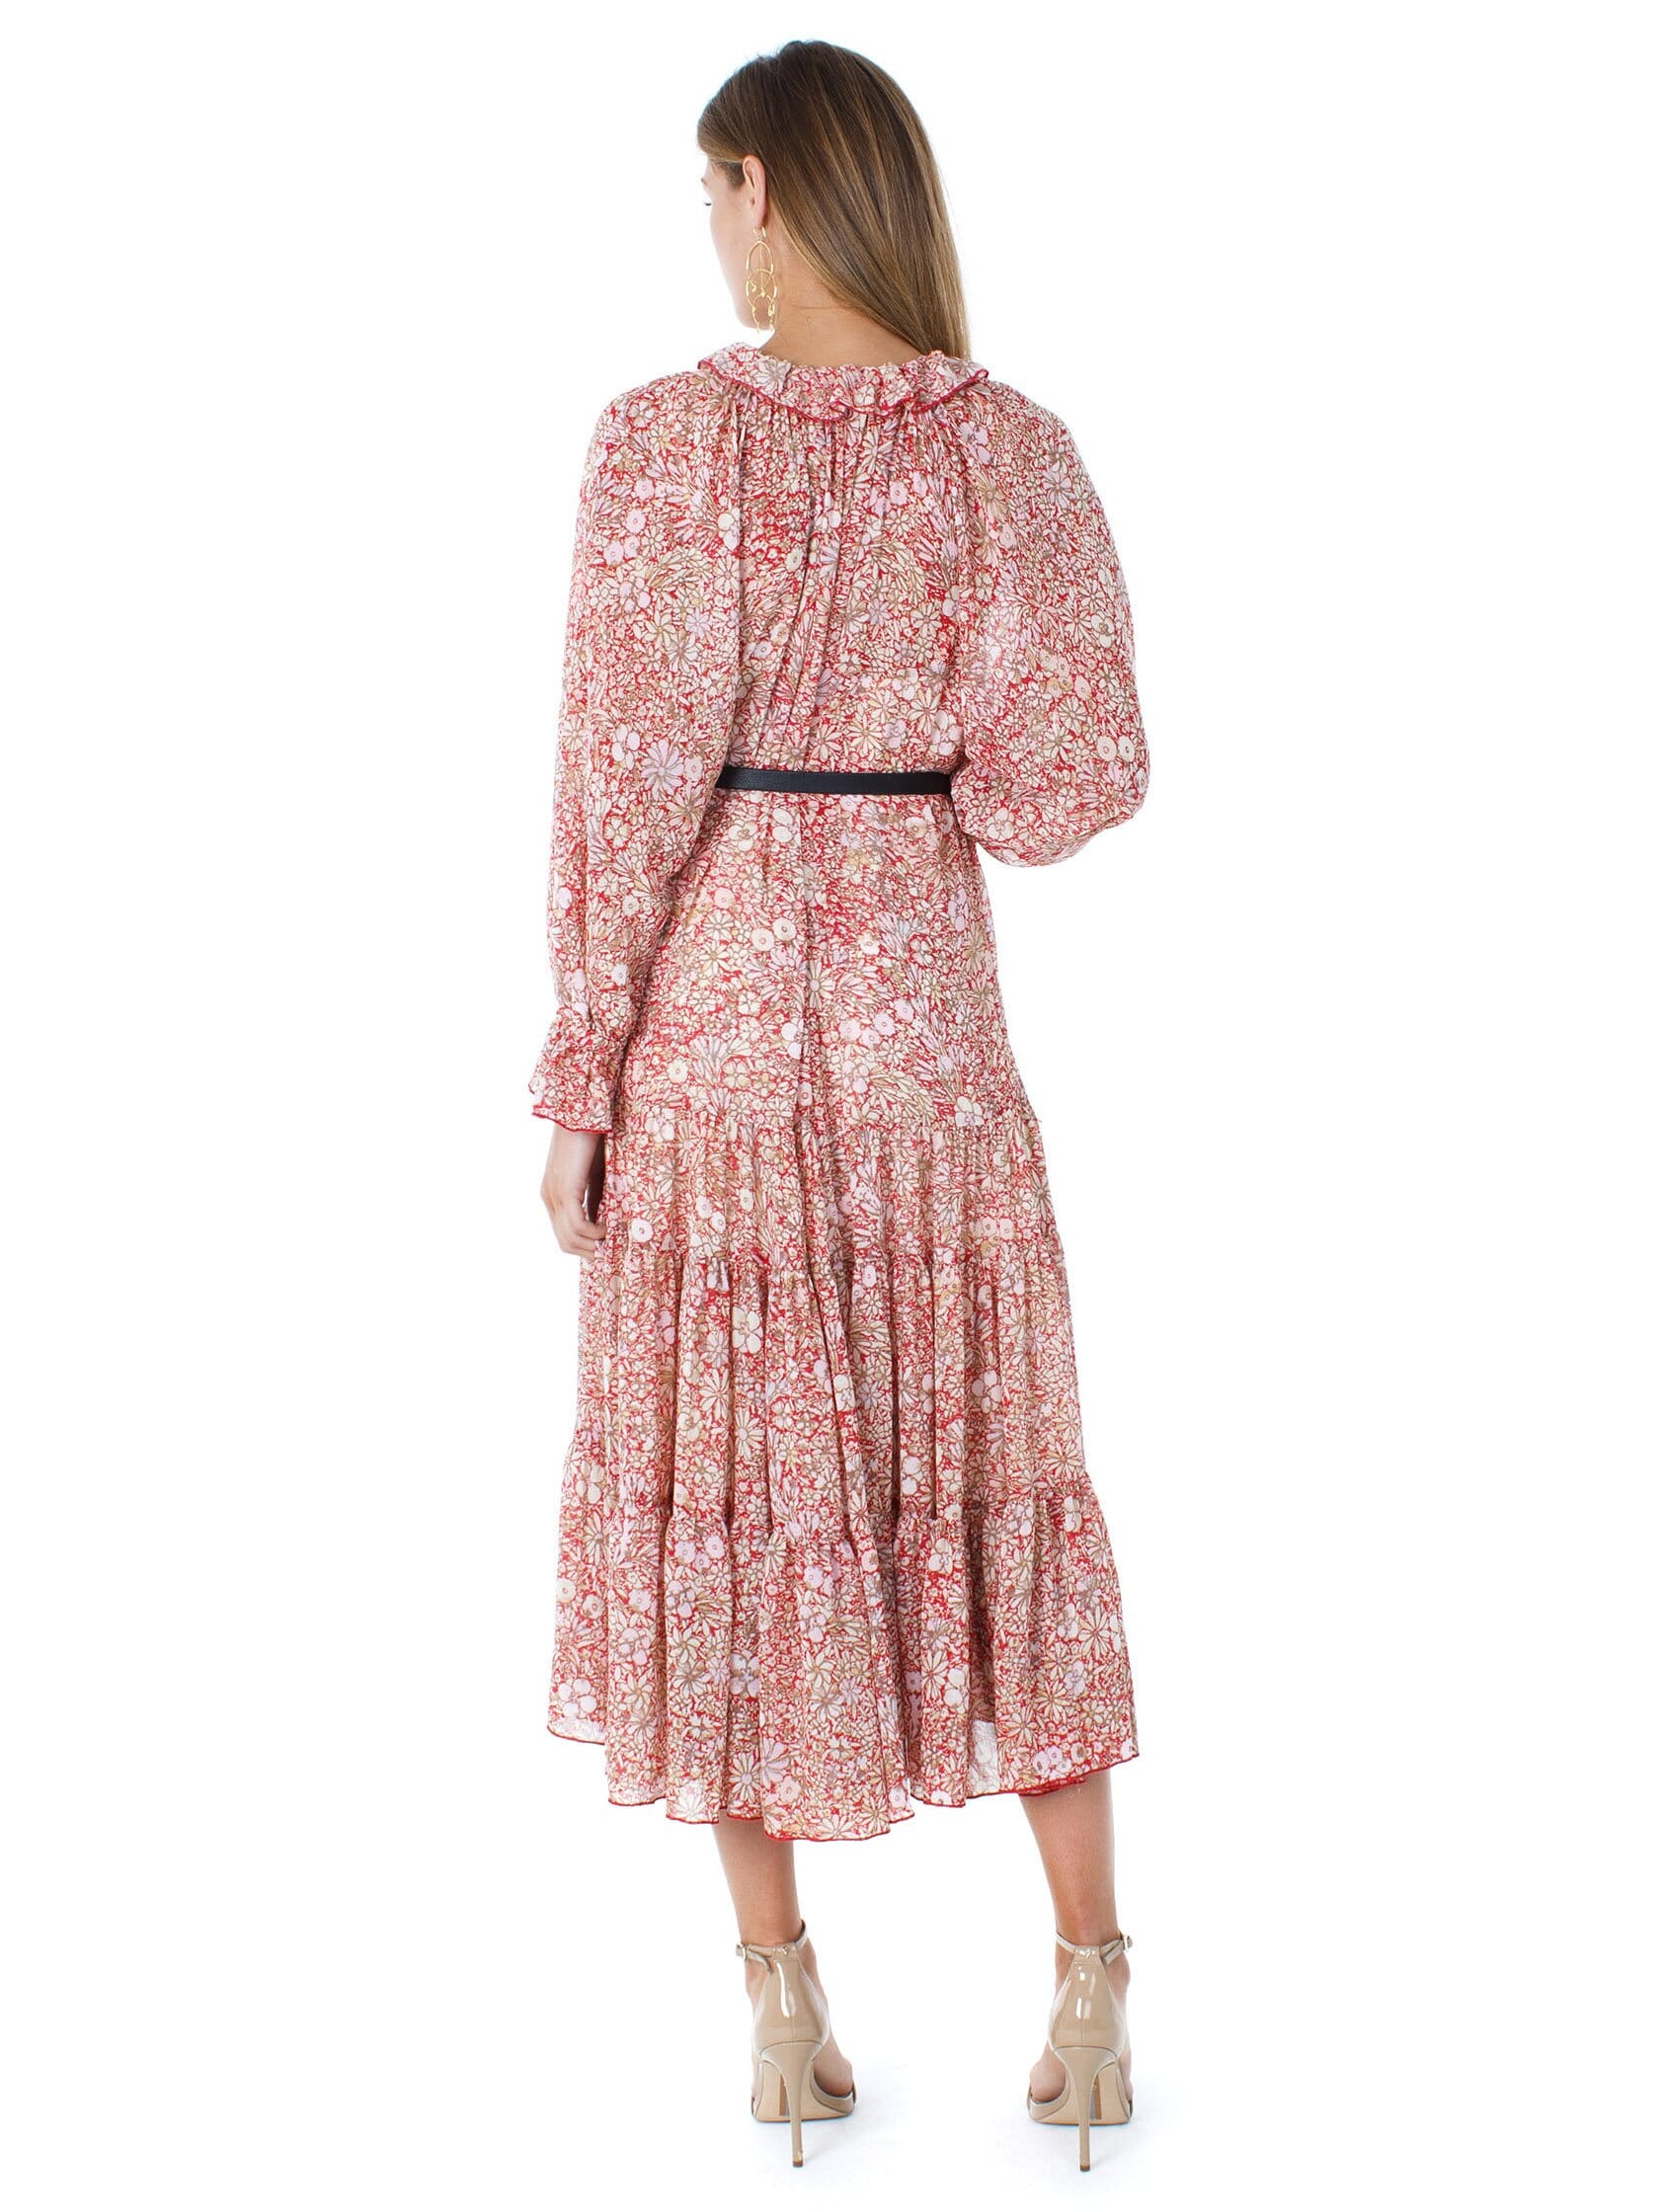 Free People Feeling Groovy Maxi Dress in Red Combo